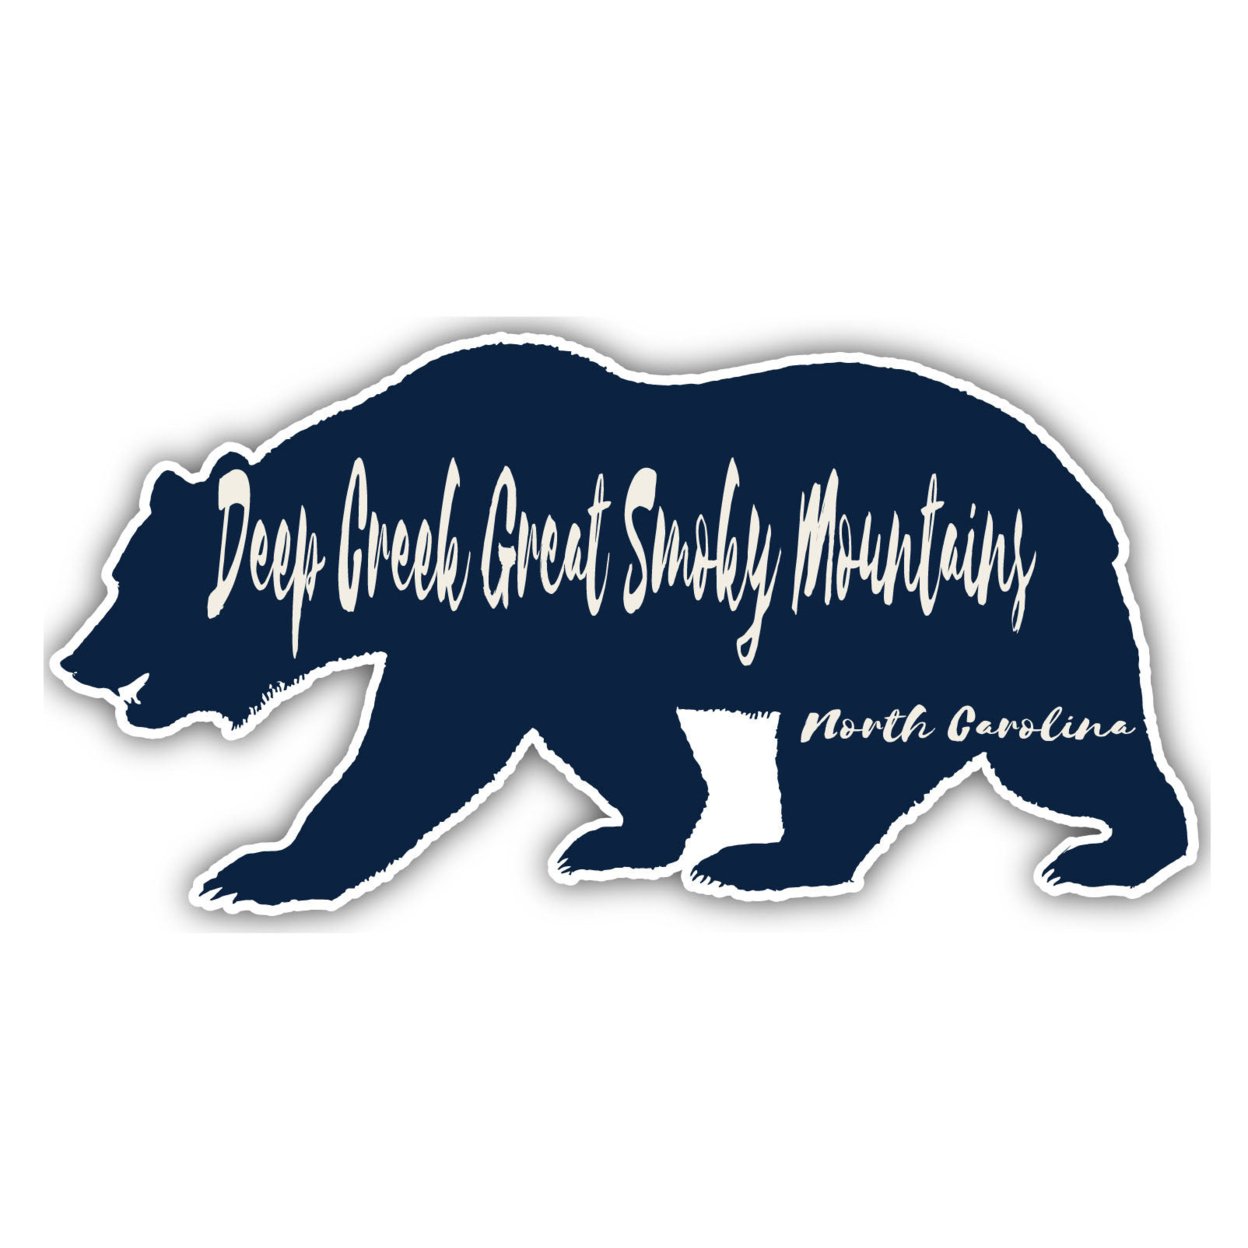 Deep Creek Great Smoky Mountains North Carolina Souvenir Decorative Stickers (Choose Theme And Size) - 4-Pack, 12-Inch, Bear